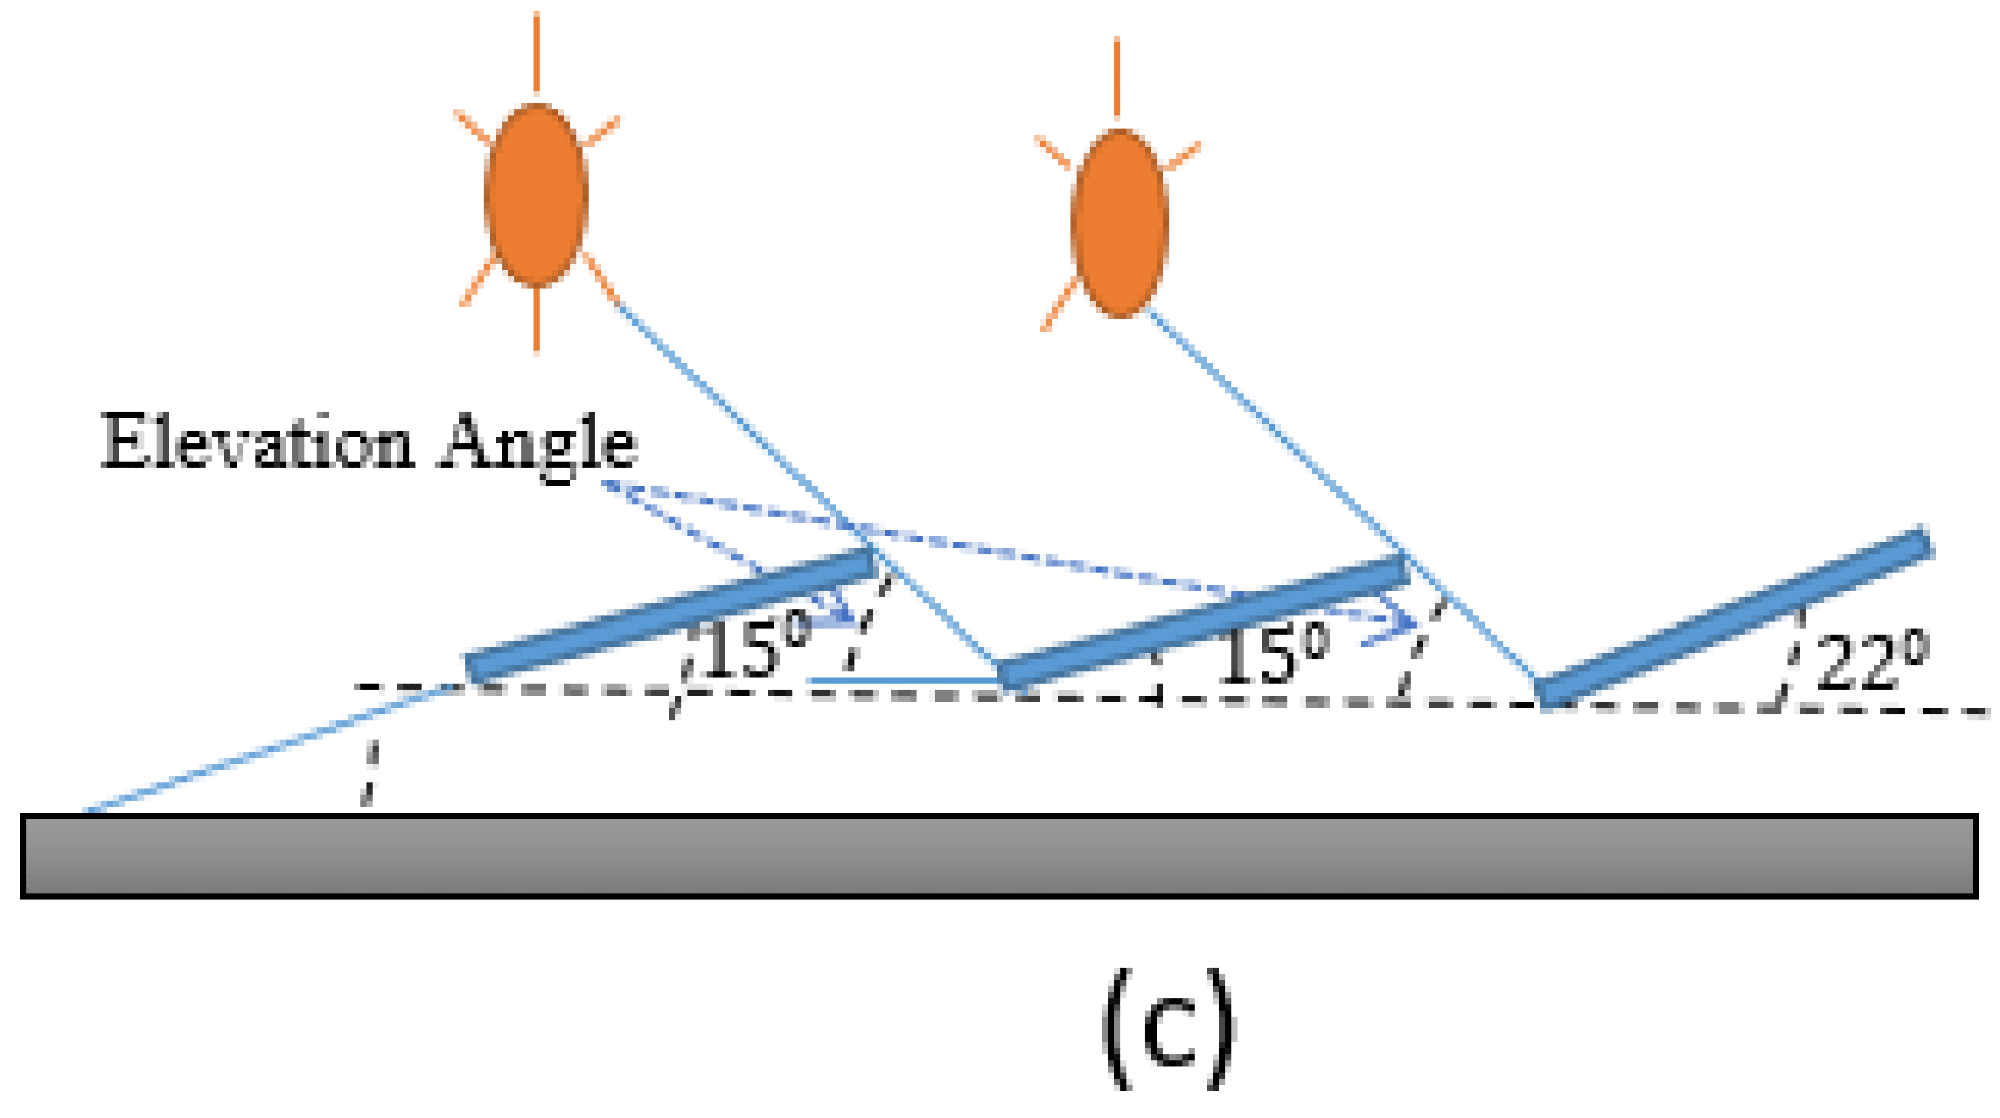 Relationship between elevation angle and spacing between rows: (a) Scenario 1, (b) Scenario 2, (c) Scenario 3.